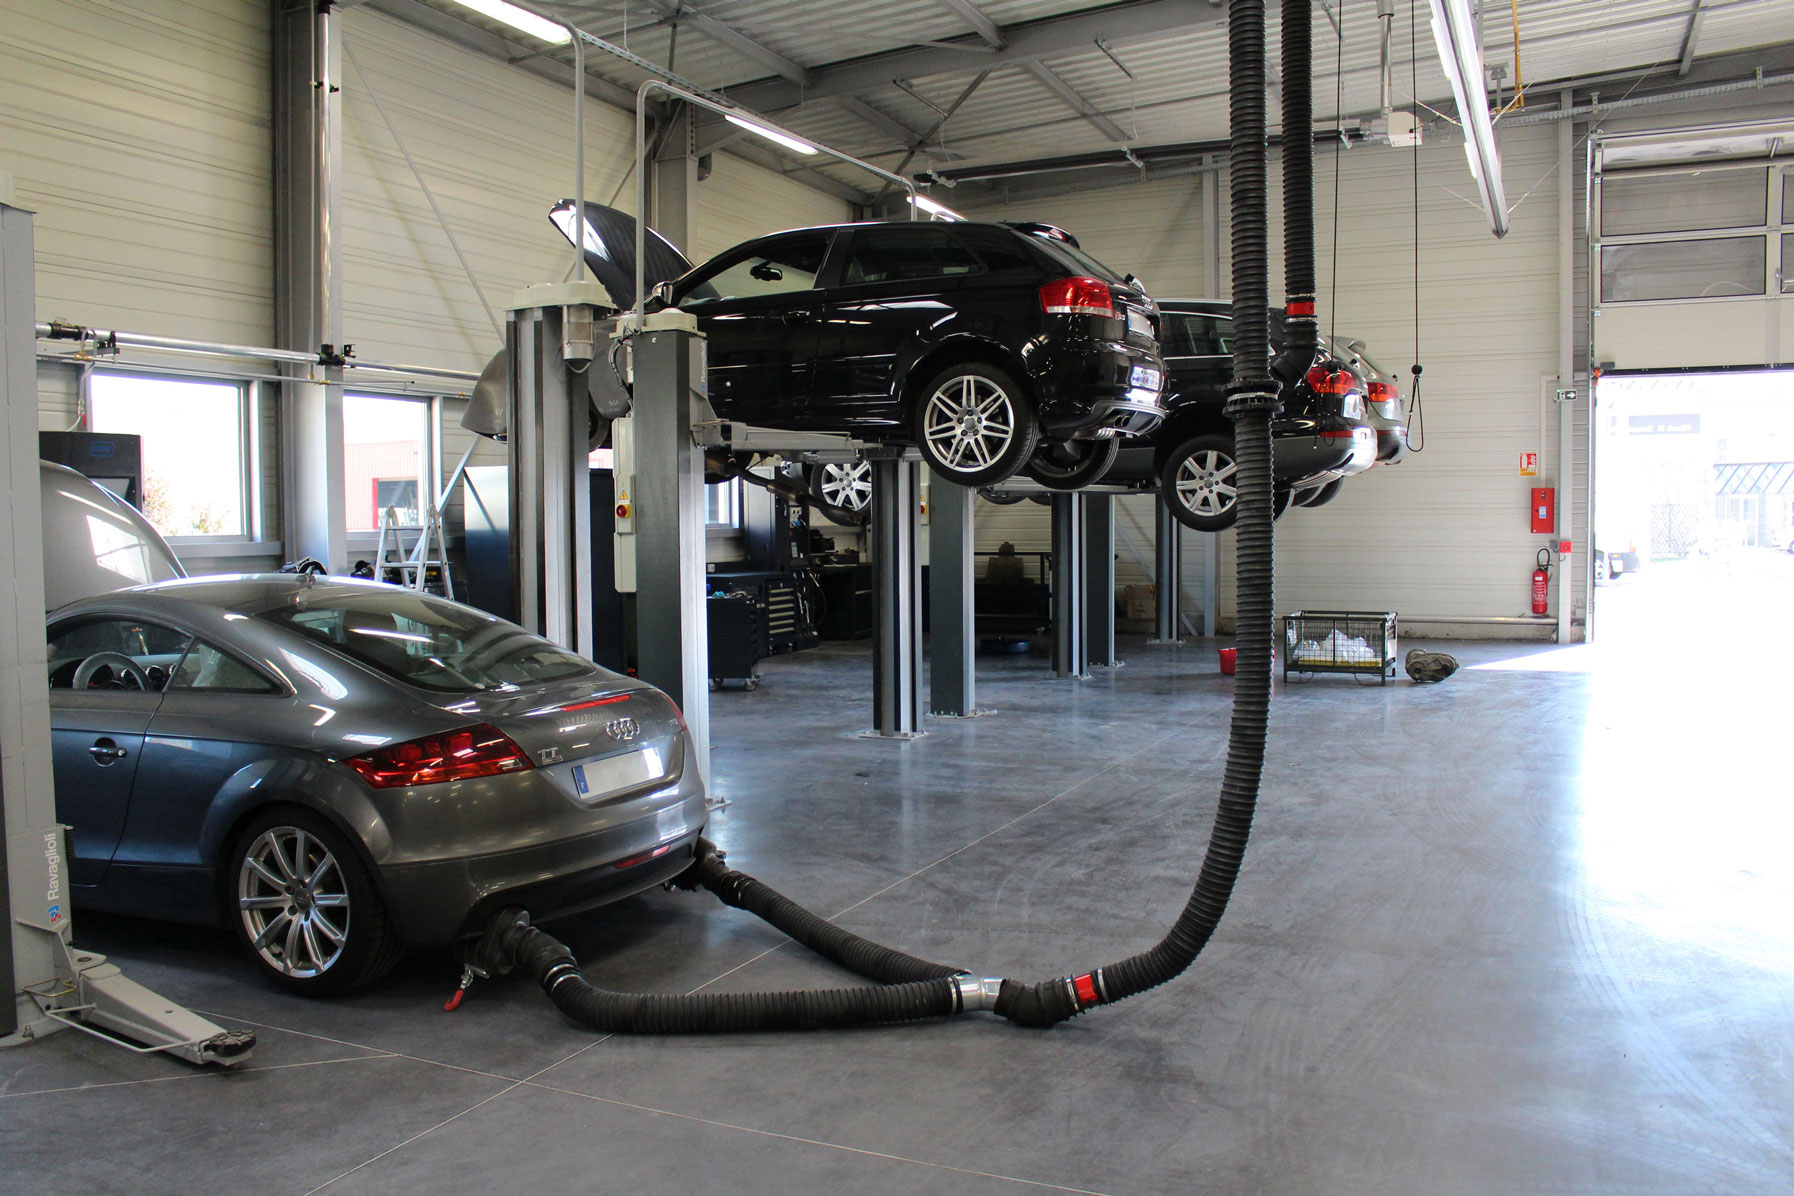 AUDIs are serviced in a workshop equipped with Ravaglioli car lifts